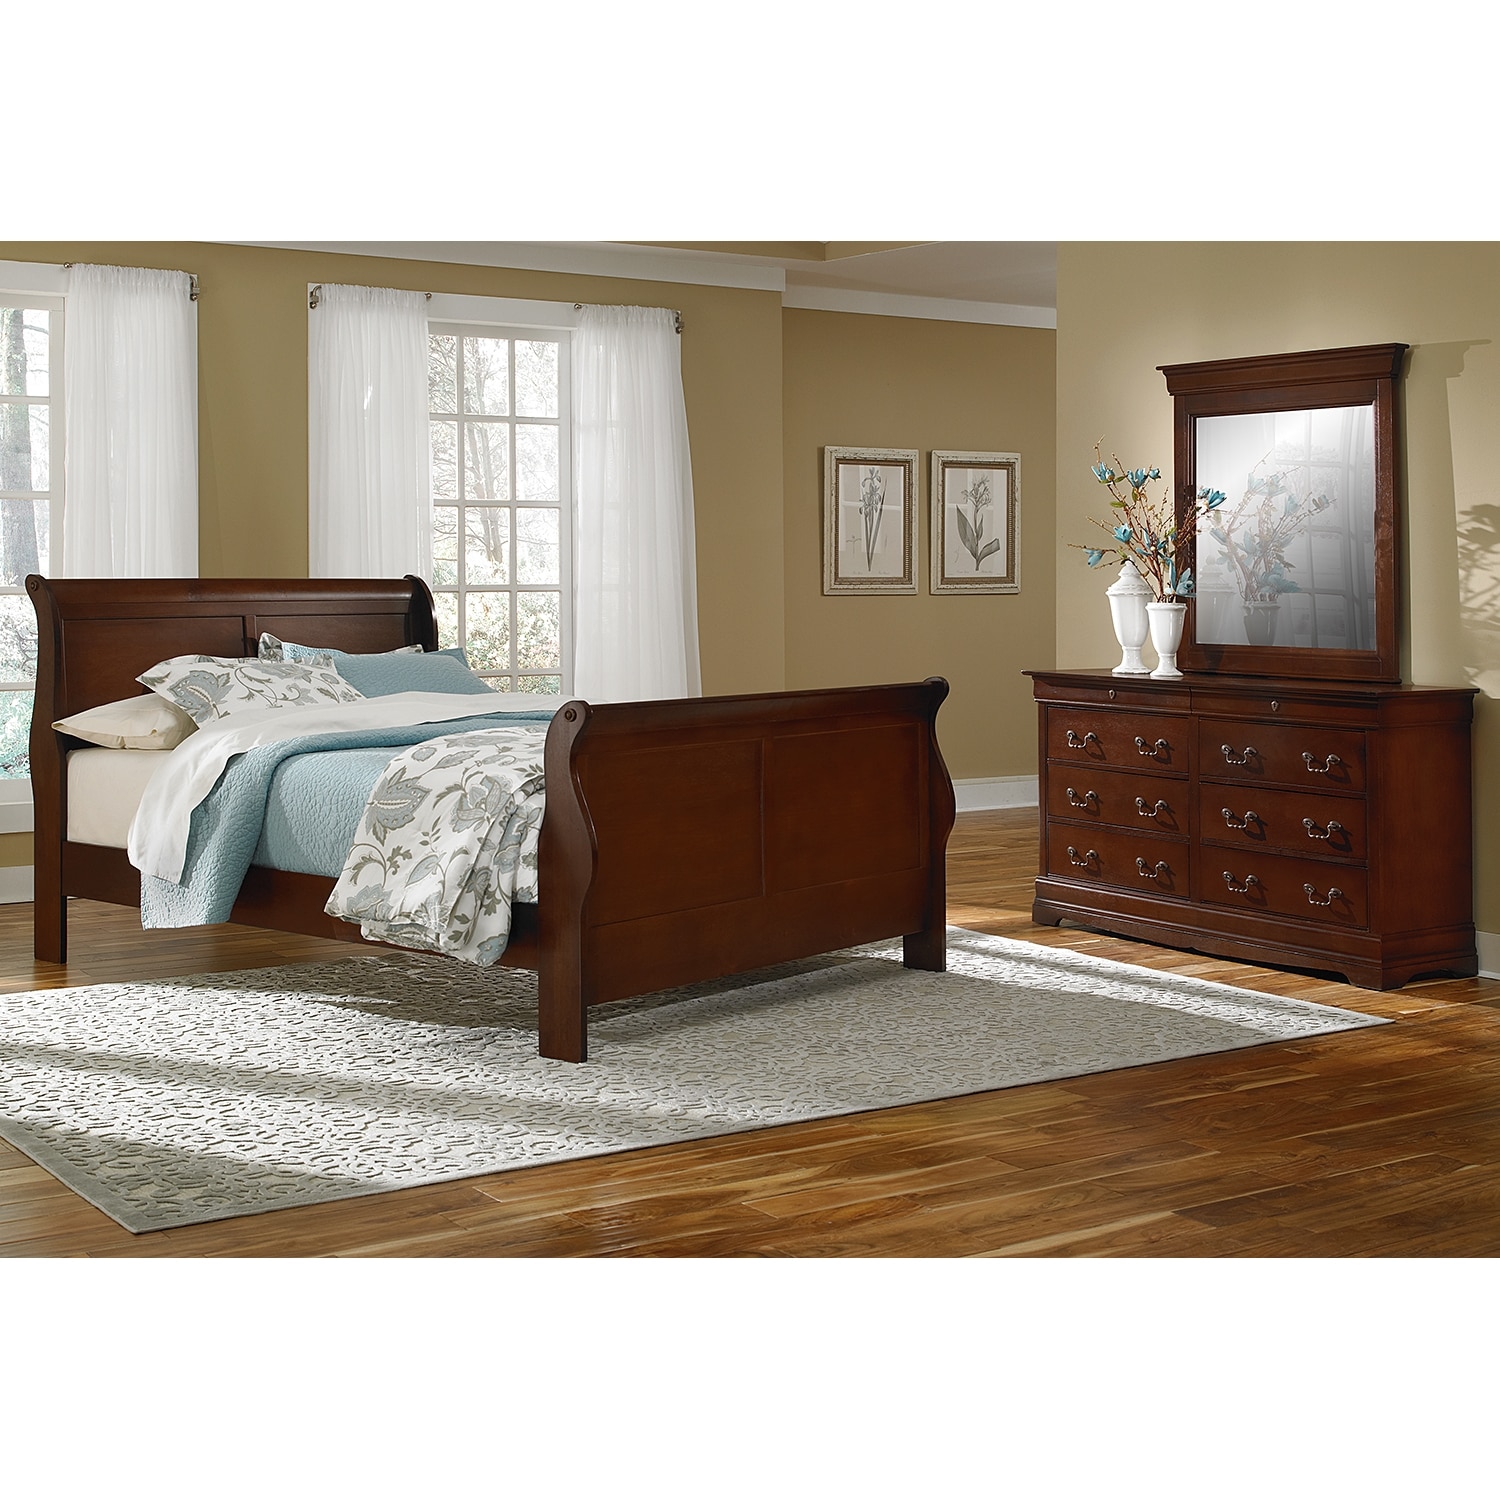 Home Decoration Live Neo Classic Bedroom Furniture